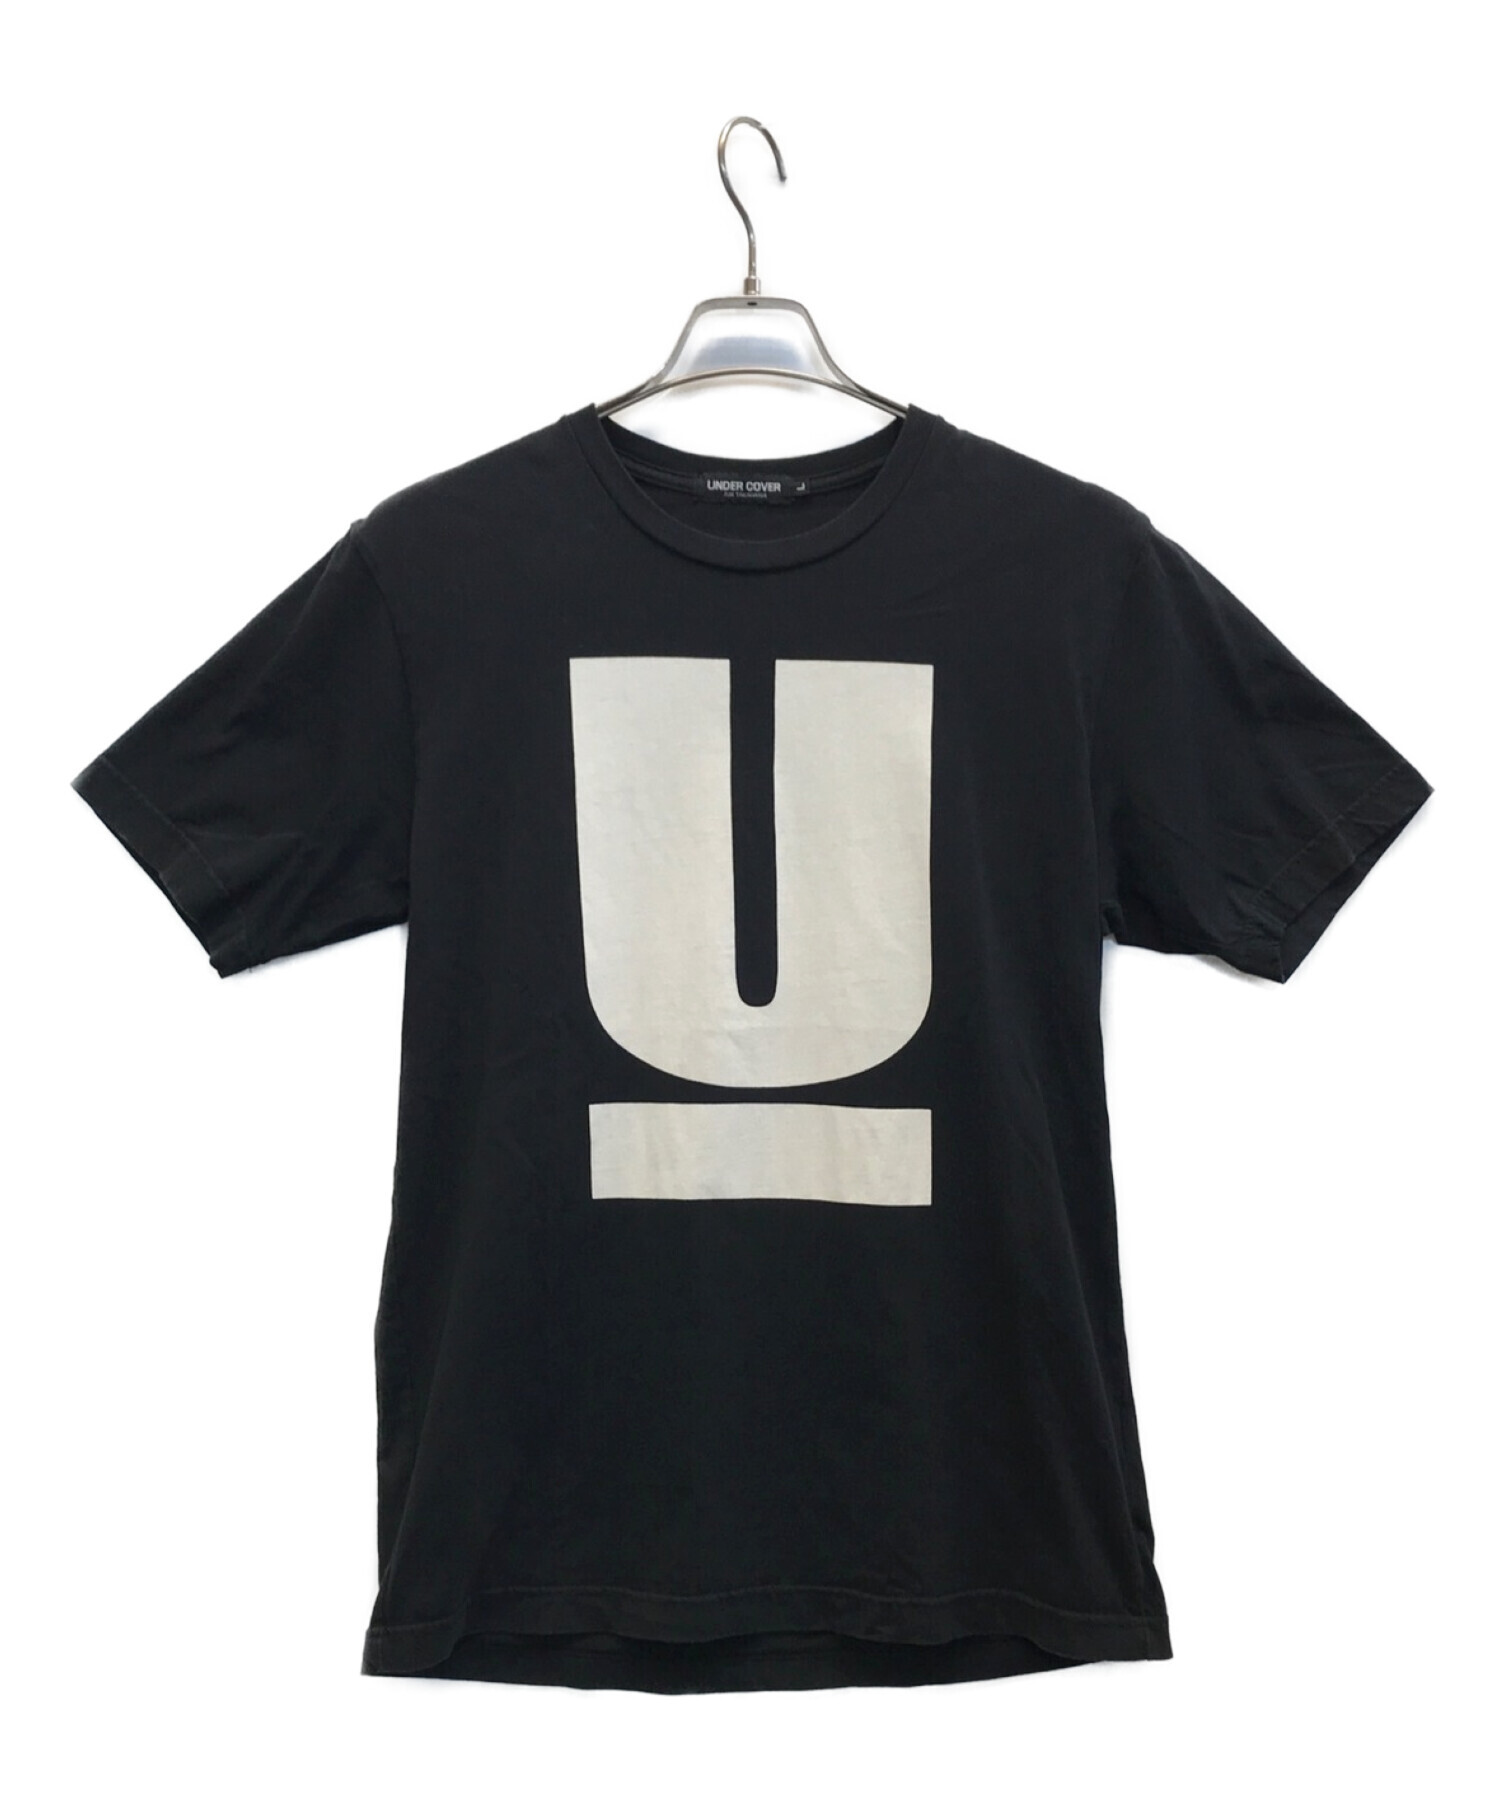 【UNDERCOVER】under coverism プリント Tシャツ